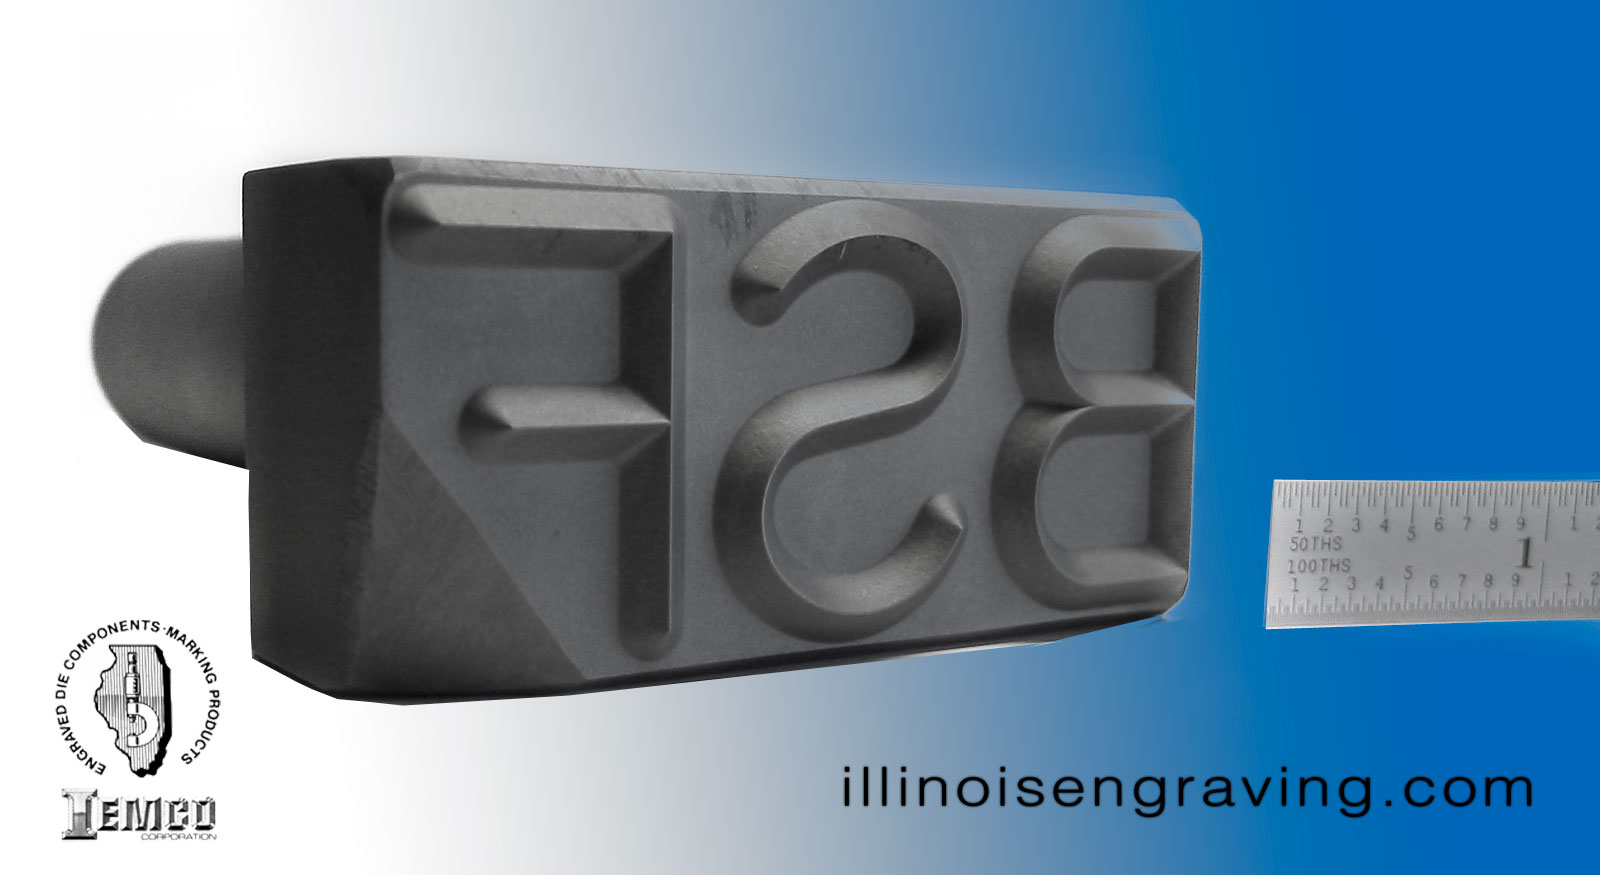 Custom Steel Stamps and Type for Part Marking